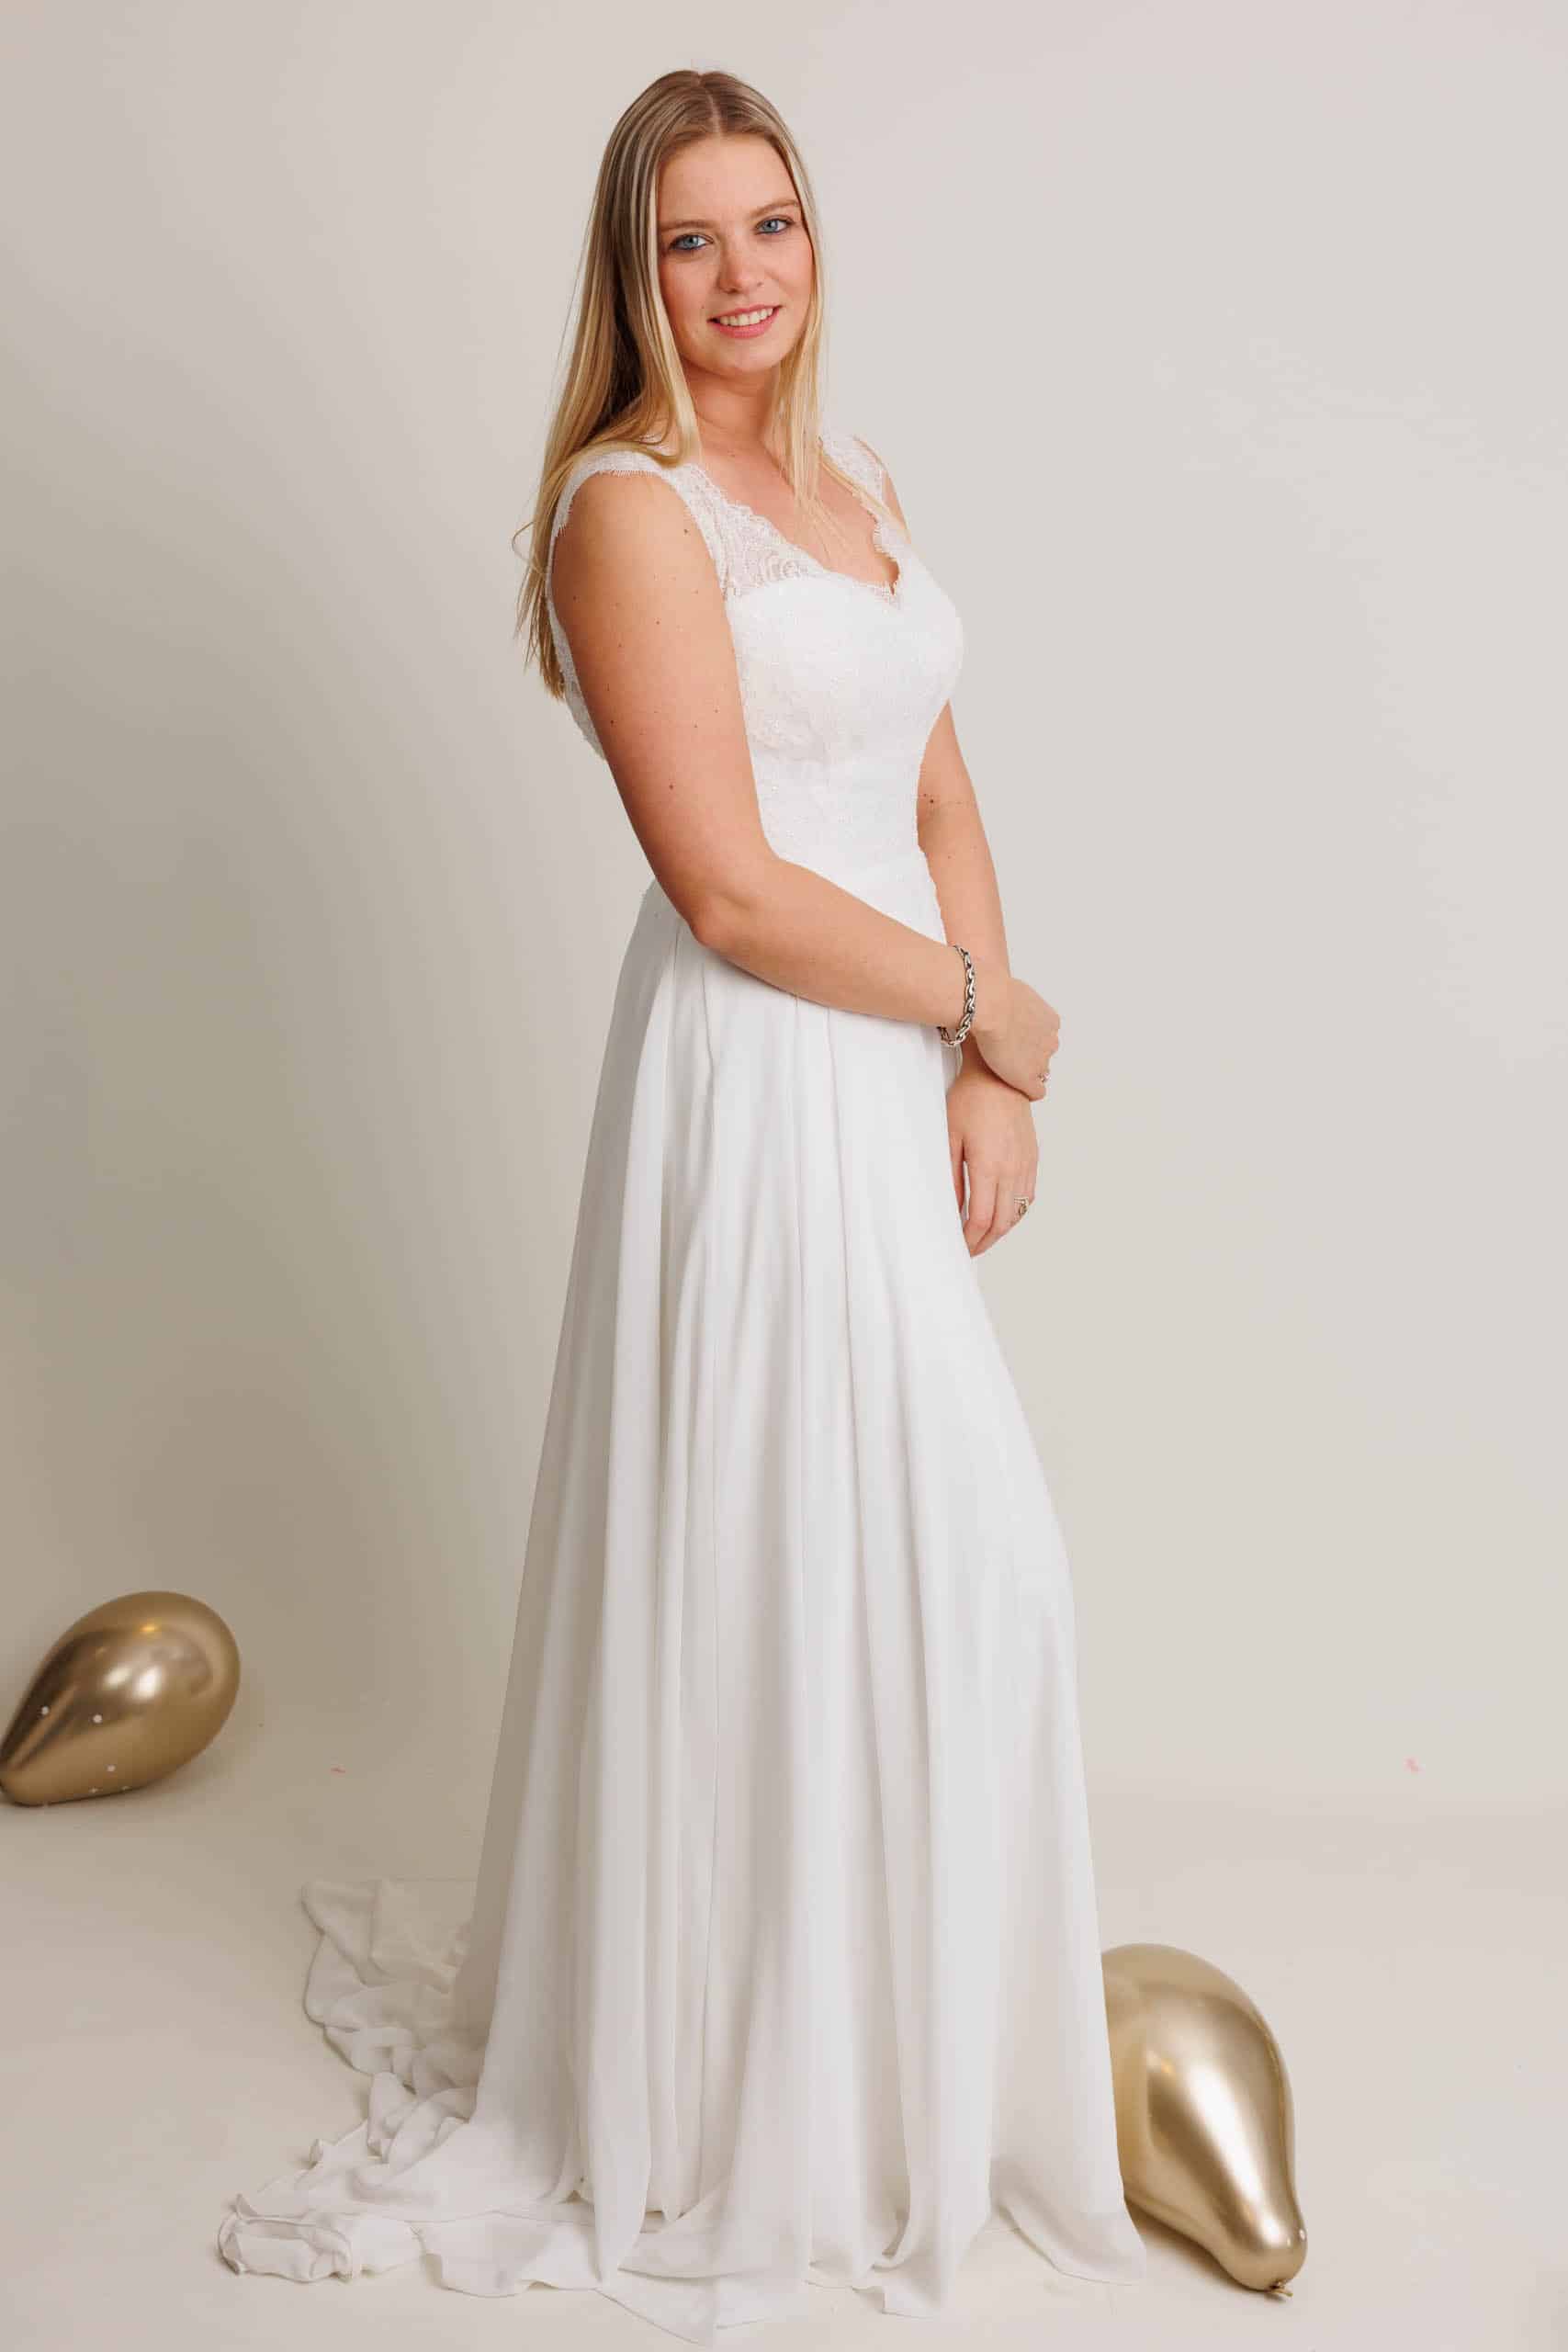 A woman in a white wedding dress poses with gold balloons.